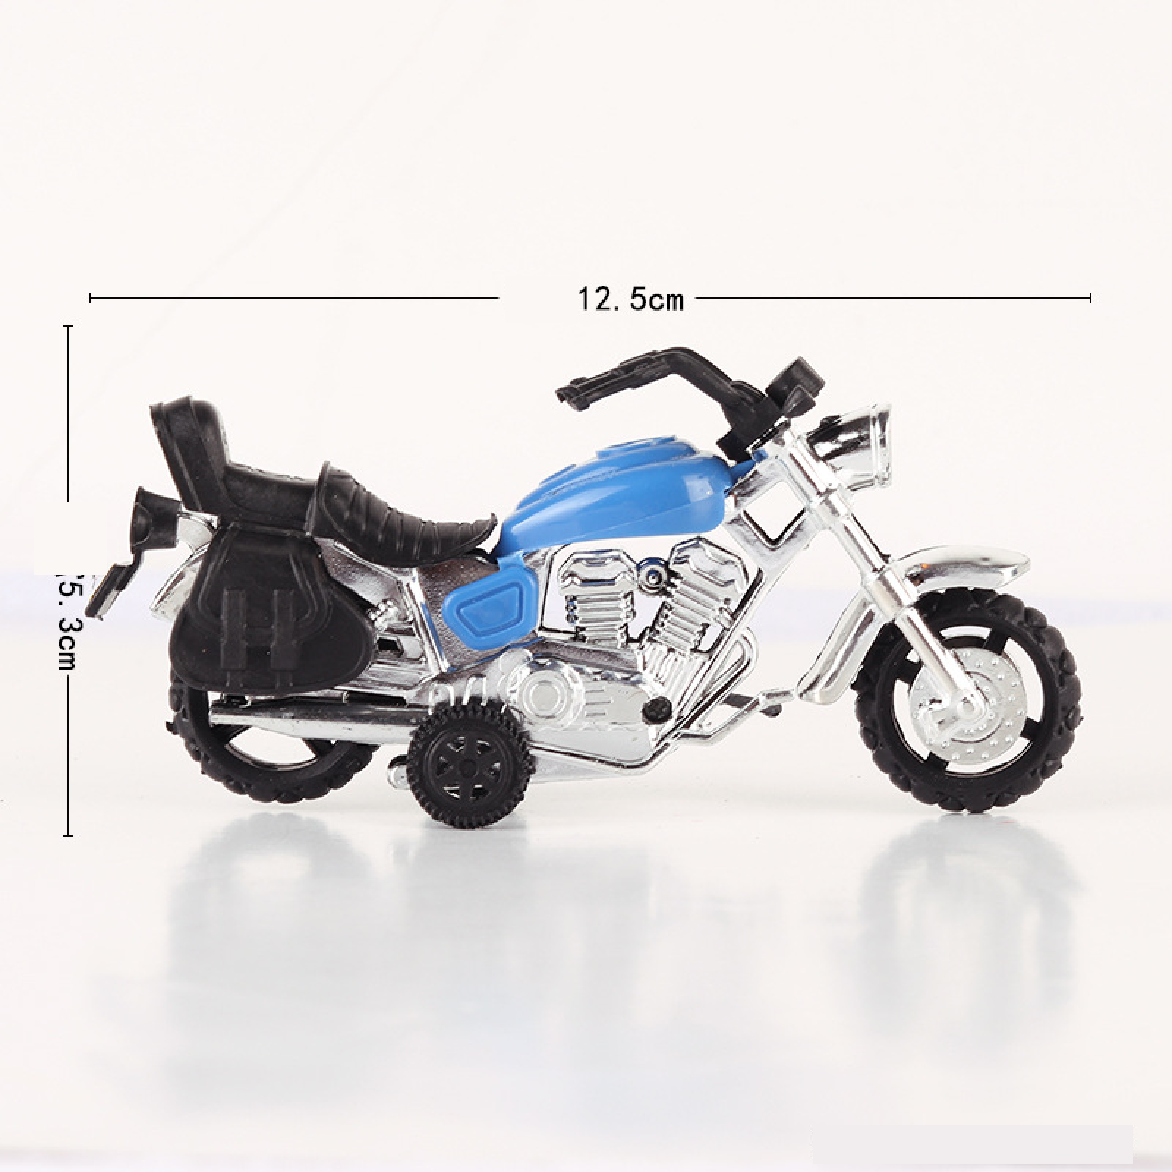 Cake Topper, Cake Decorations -  Classic 'Chopper' motorcycle - blue - Rampant Coffee Company